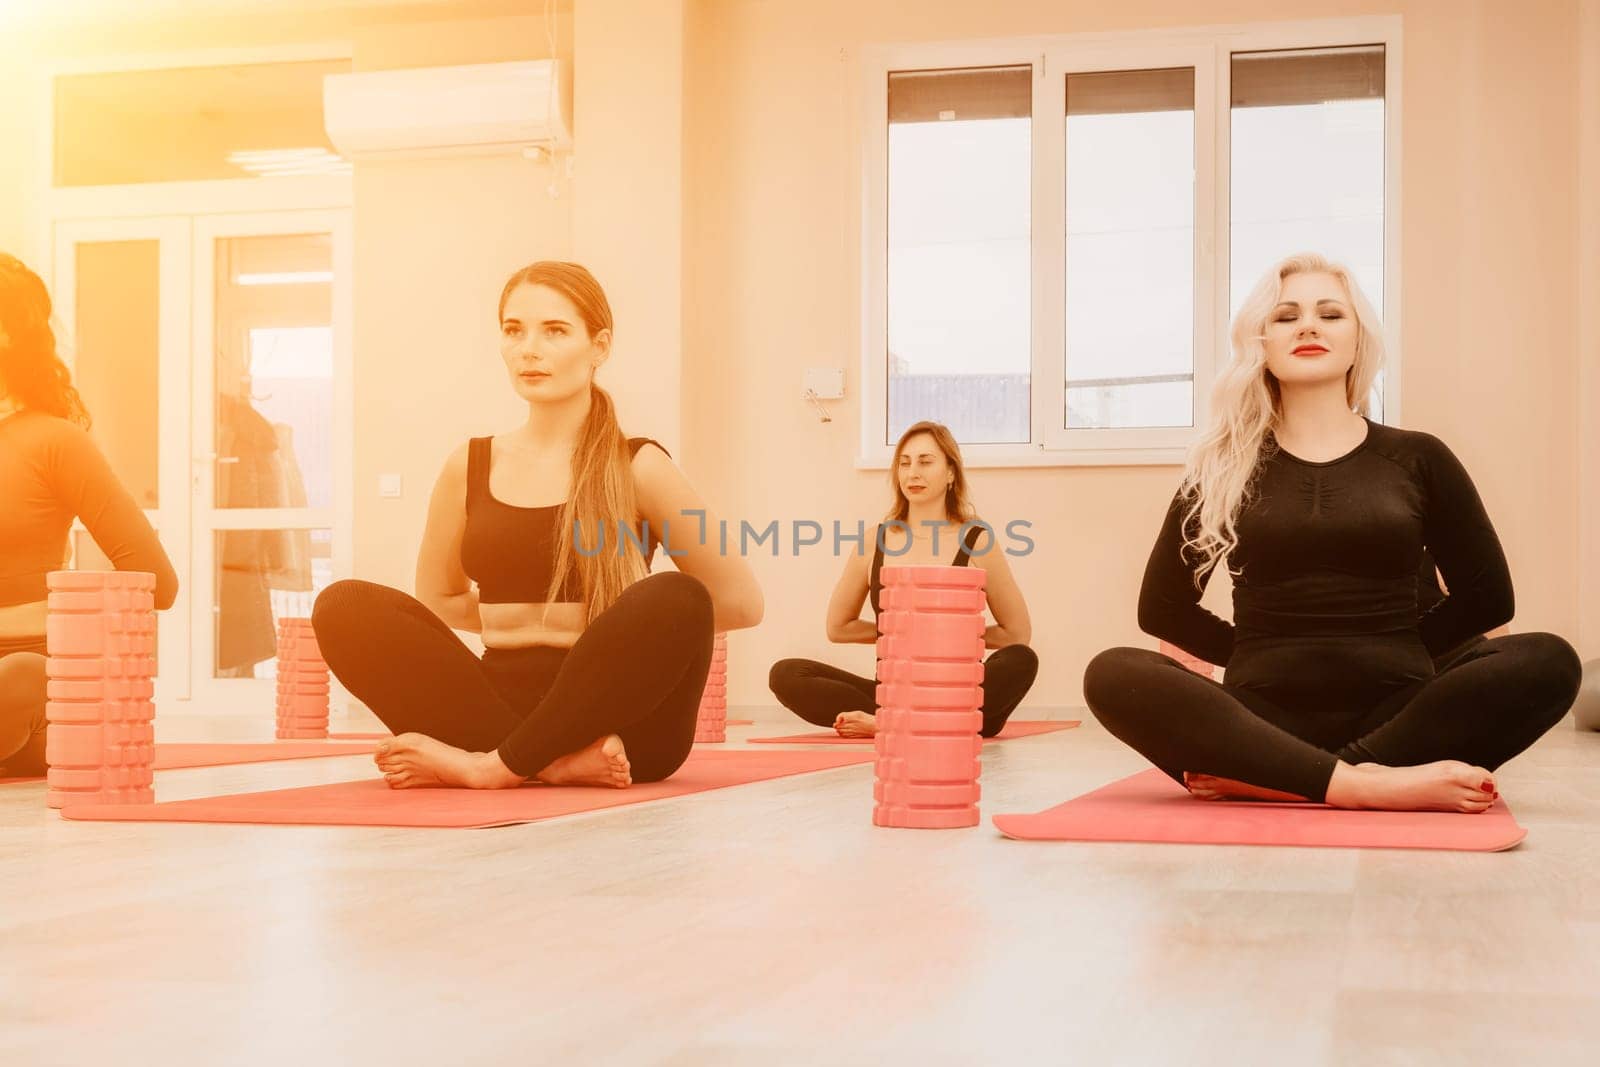 Middle aged well looking women, performing fascia exercises on the floor using a massage foam roller - tool to relieve tension in the back and relieve muscle pain. Female fitness yoga routine concept by panophotograph